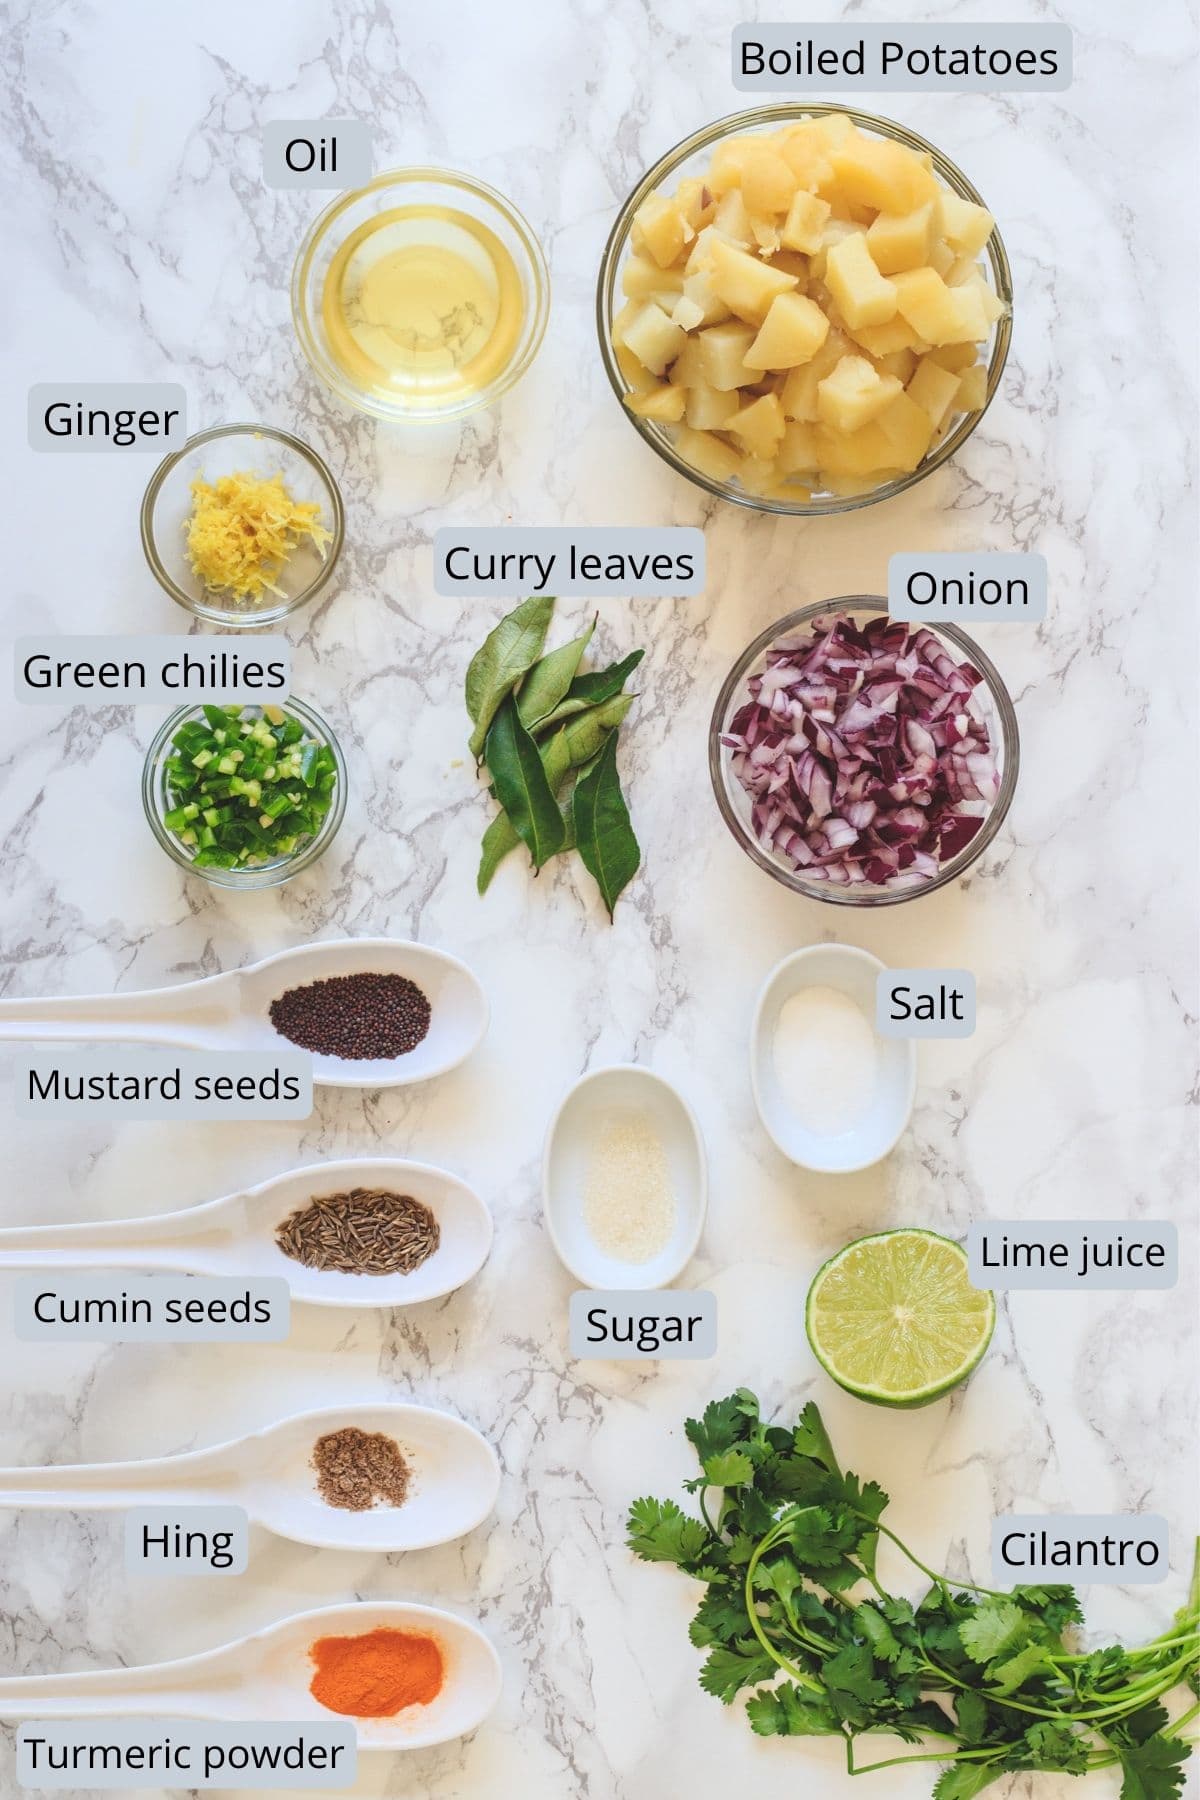 Image of ingredients used in making batata bhaji. Includes potatoes, green chili, curry leaves, spices, salt, onion, potato and cilantro.